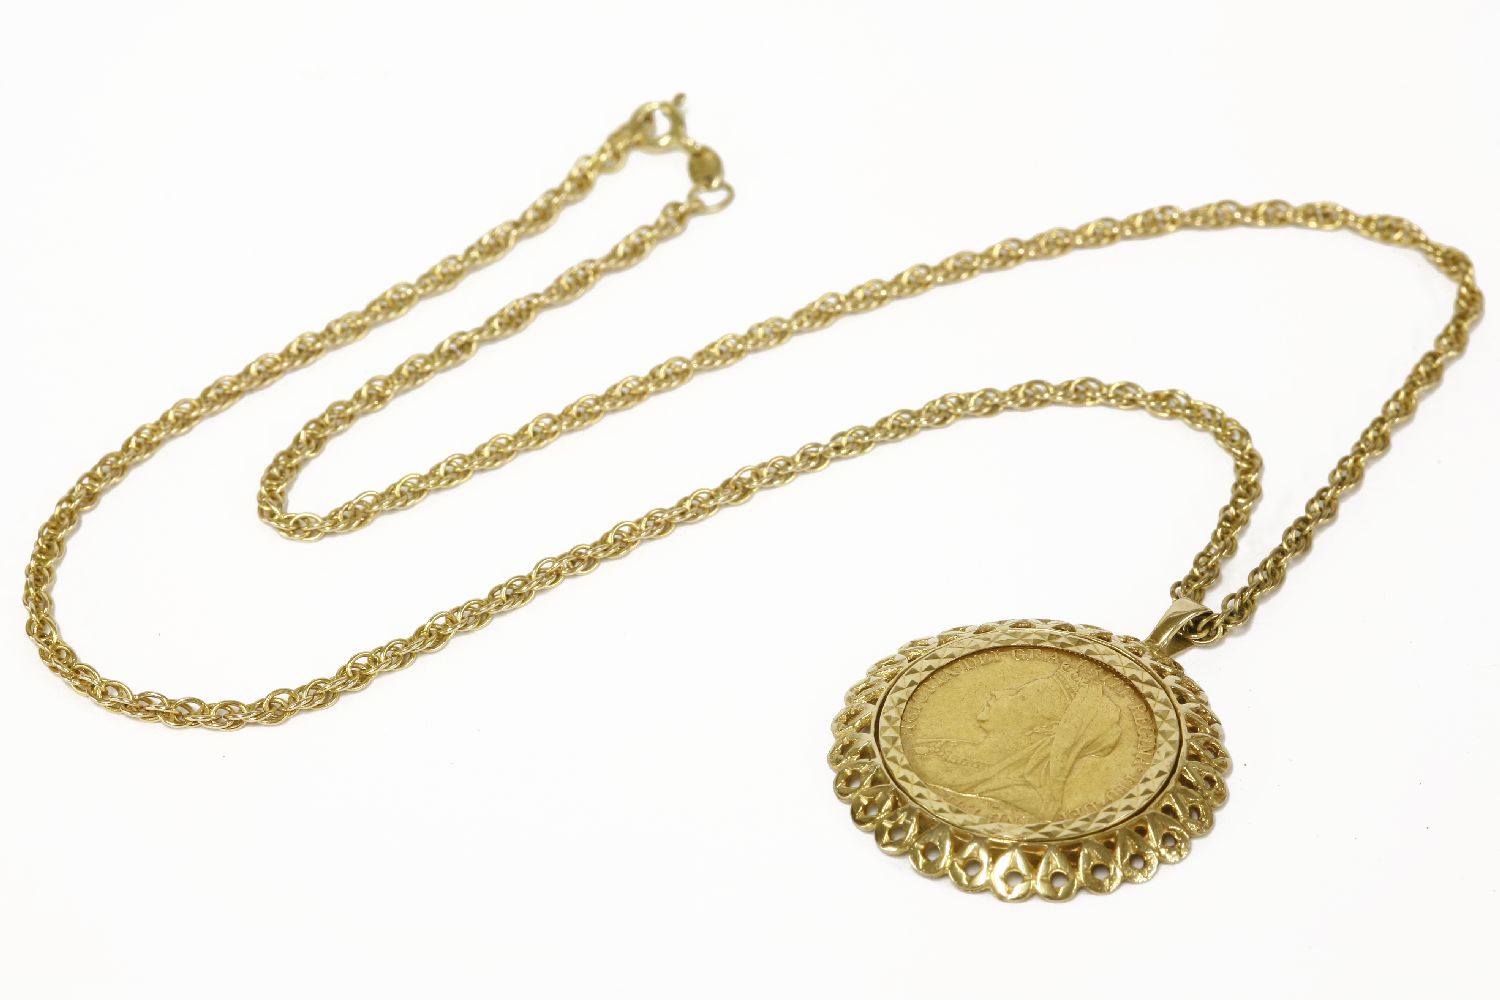 A gold sovereign dated 1898 in a 9ct gold mount, channel set on 9ct gold Prince of Wales chain18.